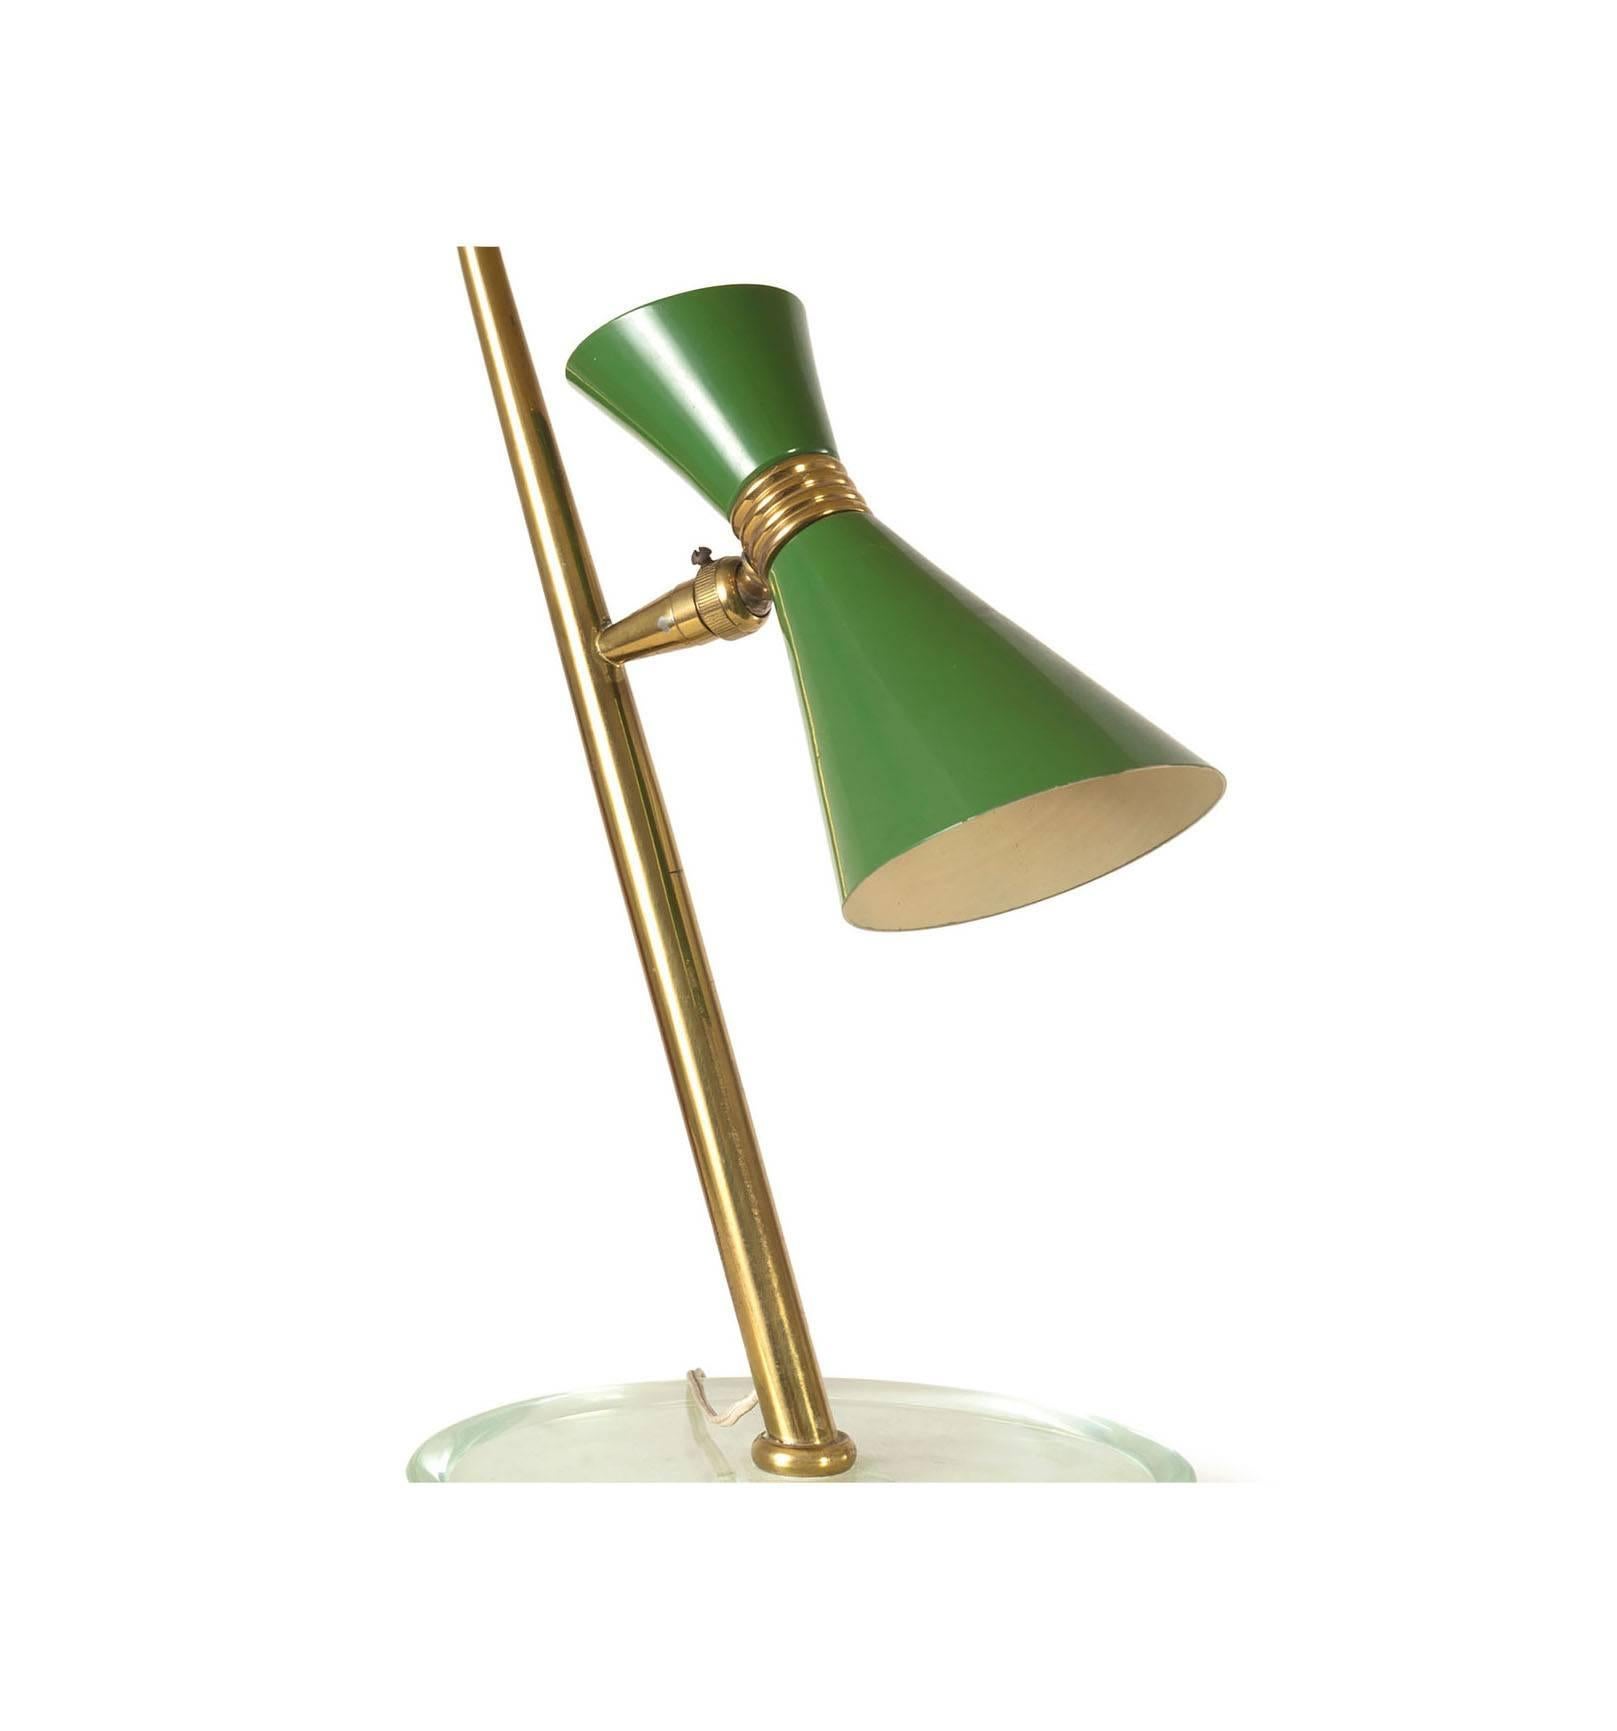 A beautiful table lamp in the style of Fontana Arte diabolo-shaped lamp shade with glass base.